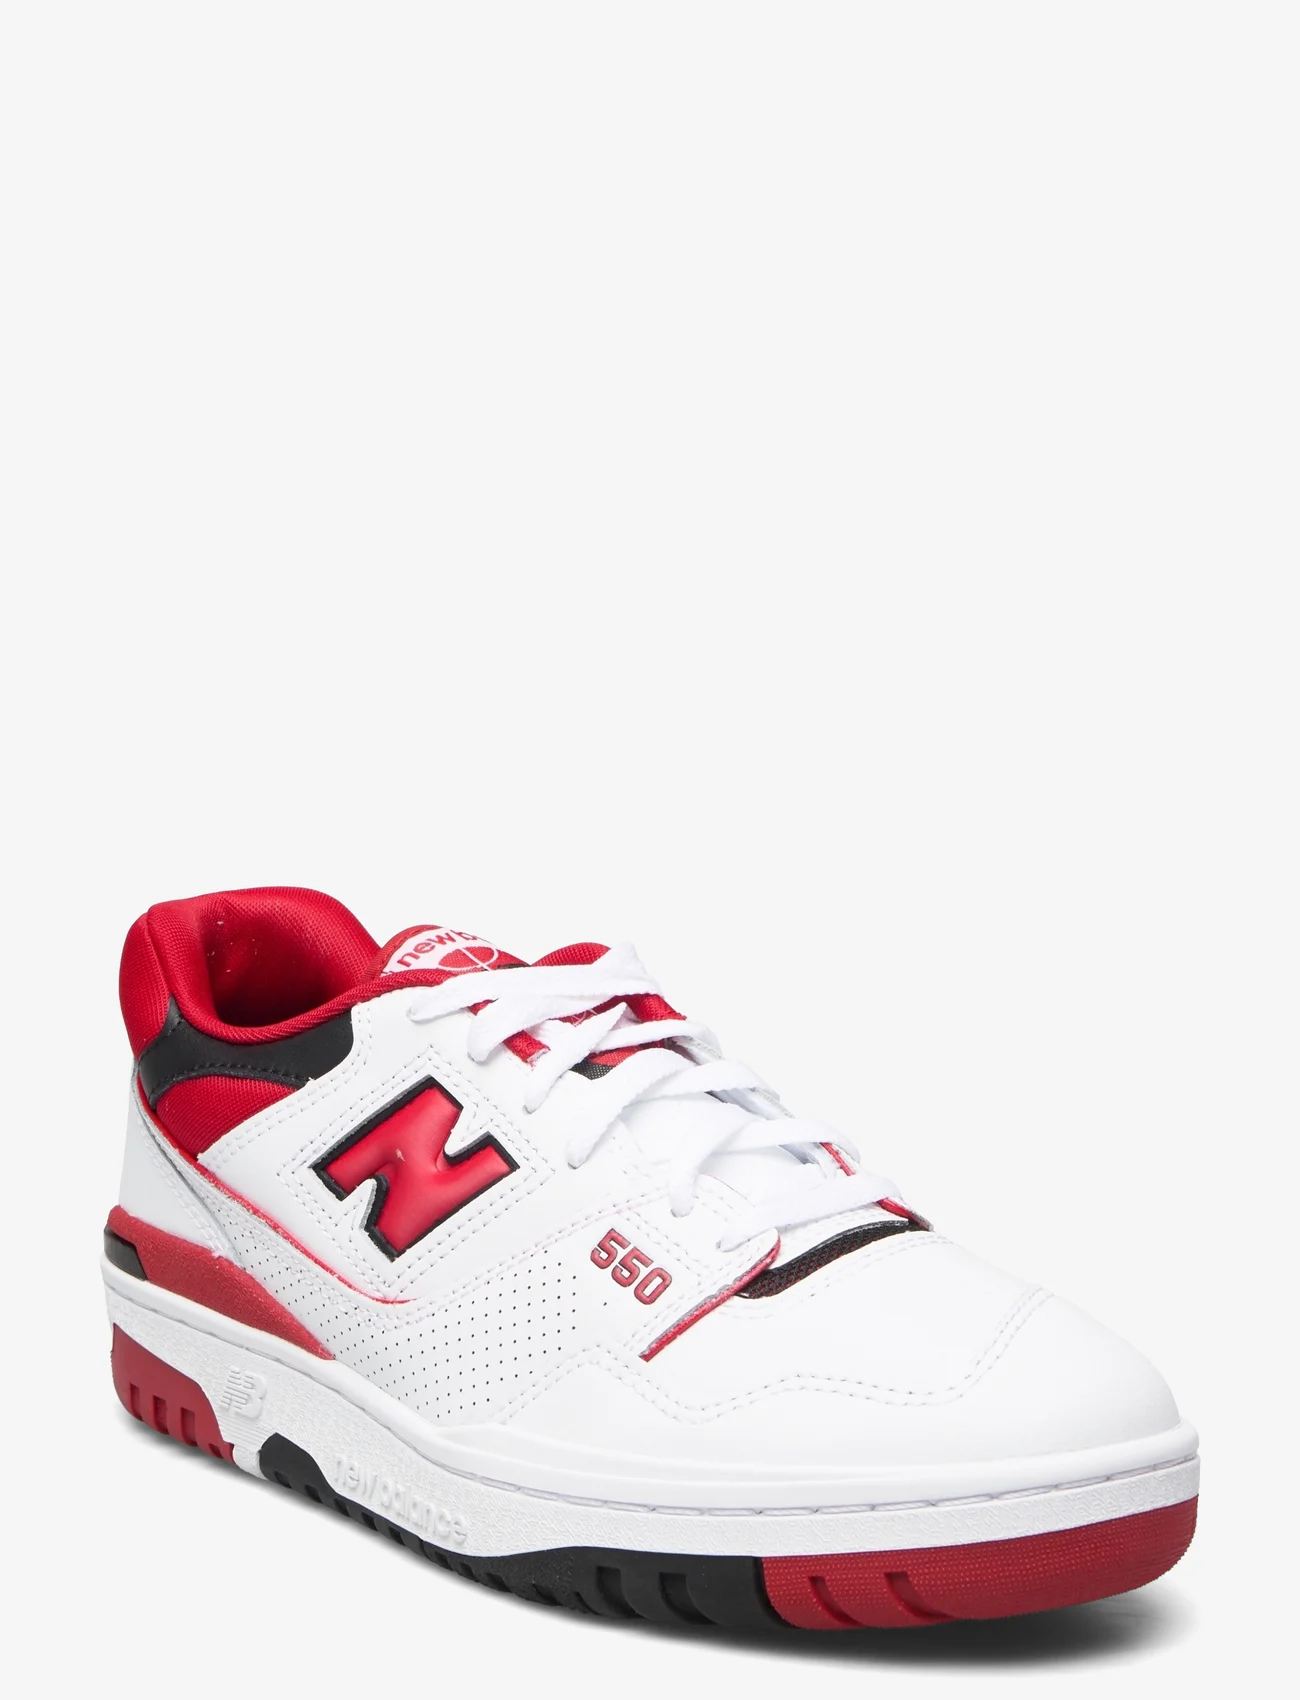 New Balance - New Balance 550 - low tops - white/red - 0